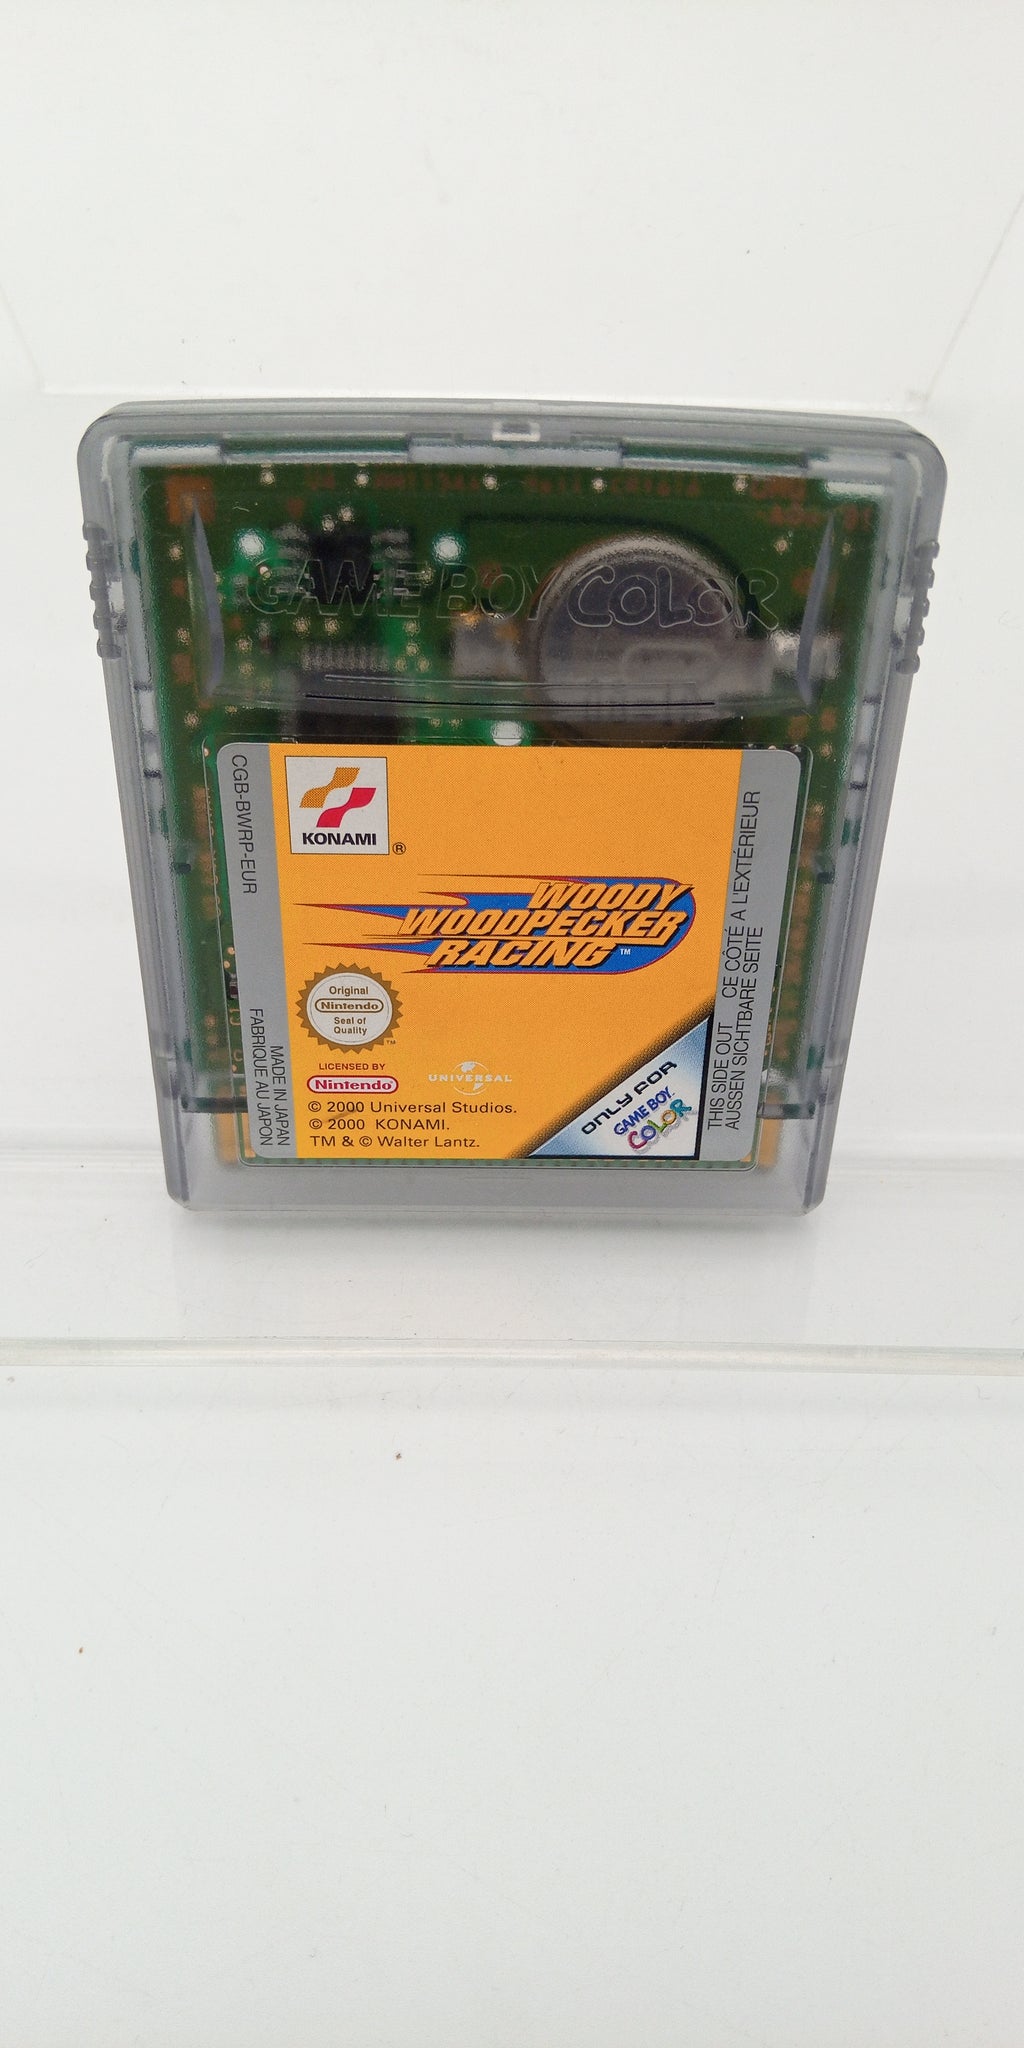 WOODY WOODPECKER RACING GAME BOY COLOR PRE-OWNED